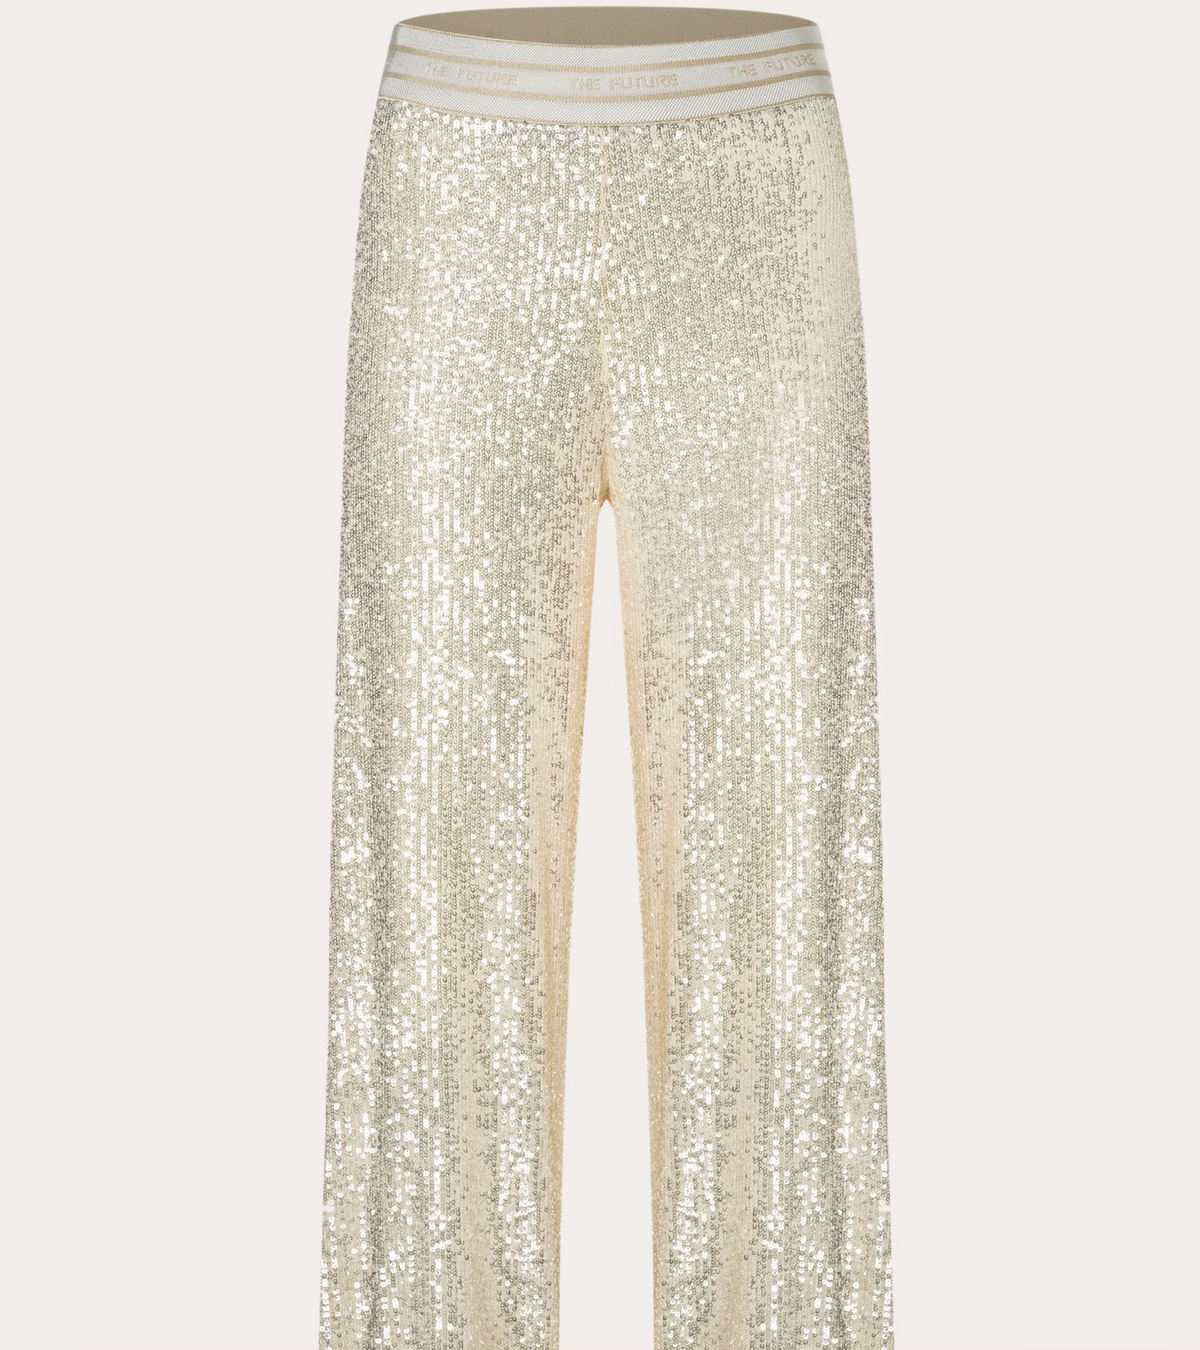 ALICE SEQUIN PANT - OFF WHITE-CAMBIO-FLOW by nicole